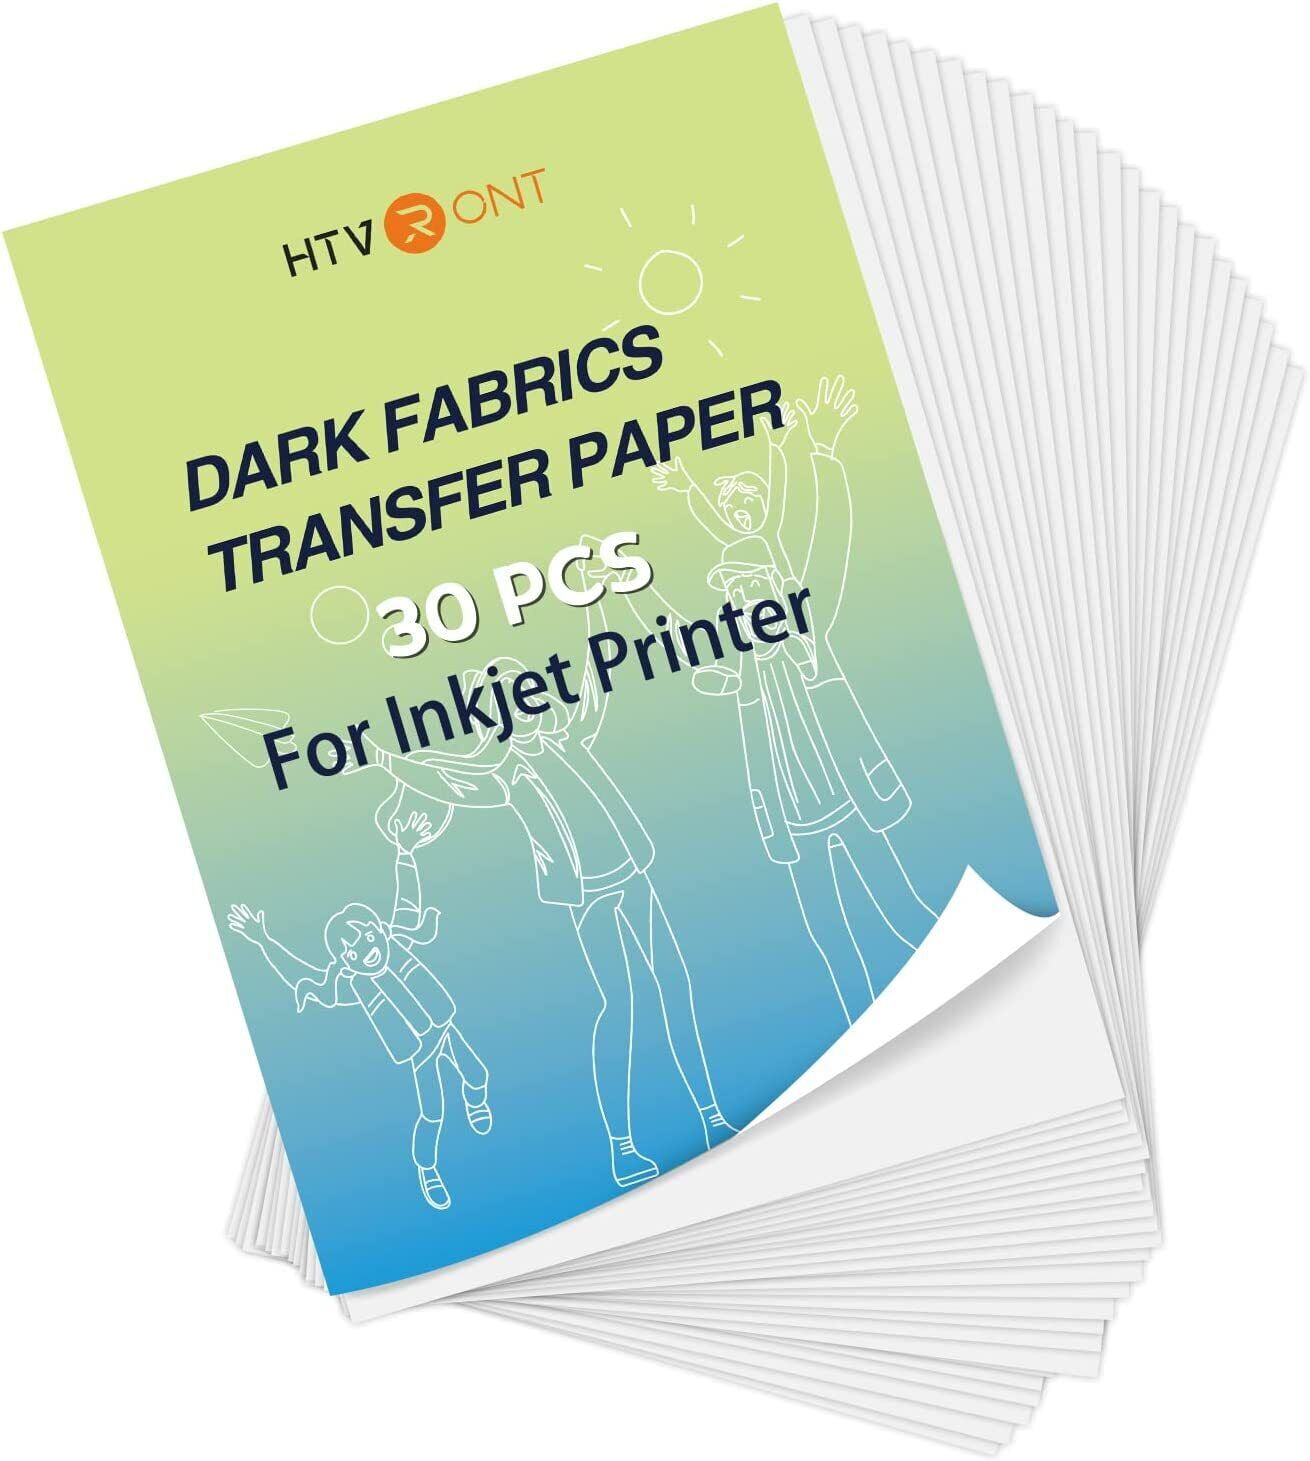 Top 6 Best Iron-on Transfer Paper for Different Fabric 2023 – HTVRONT